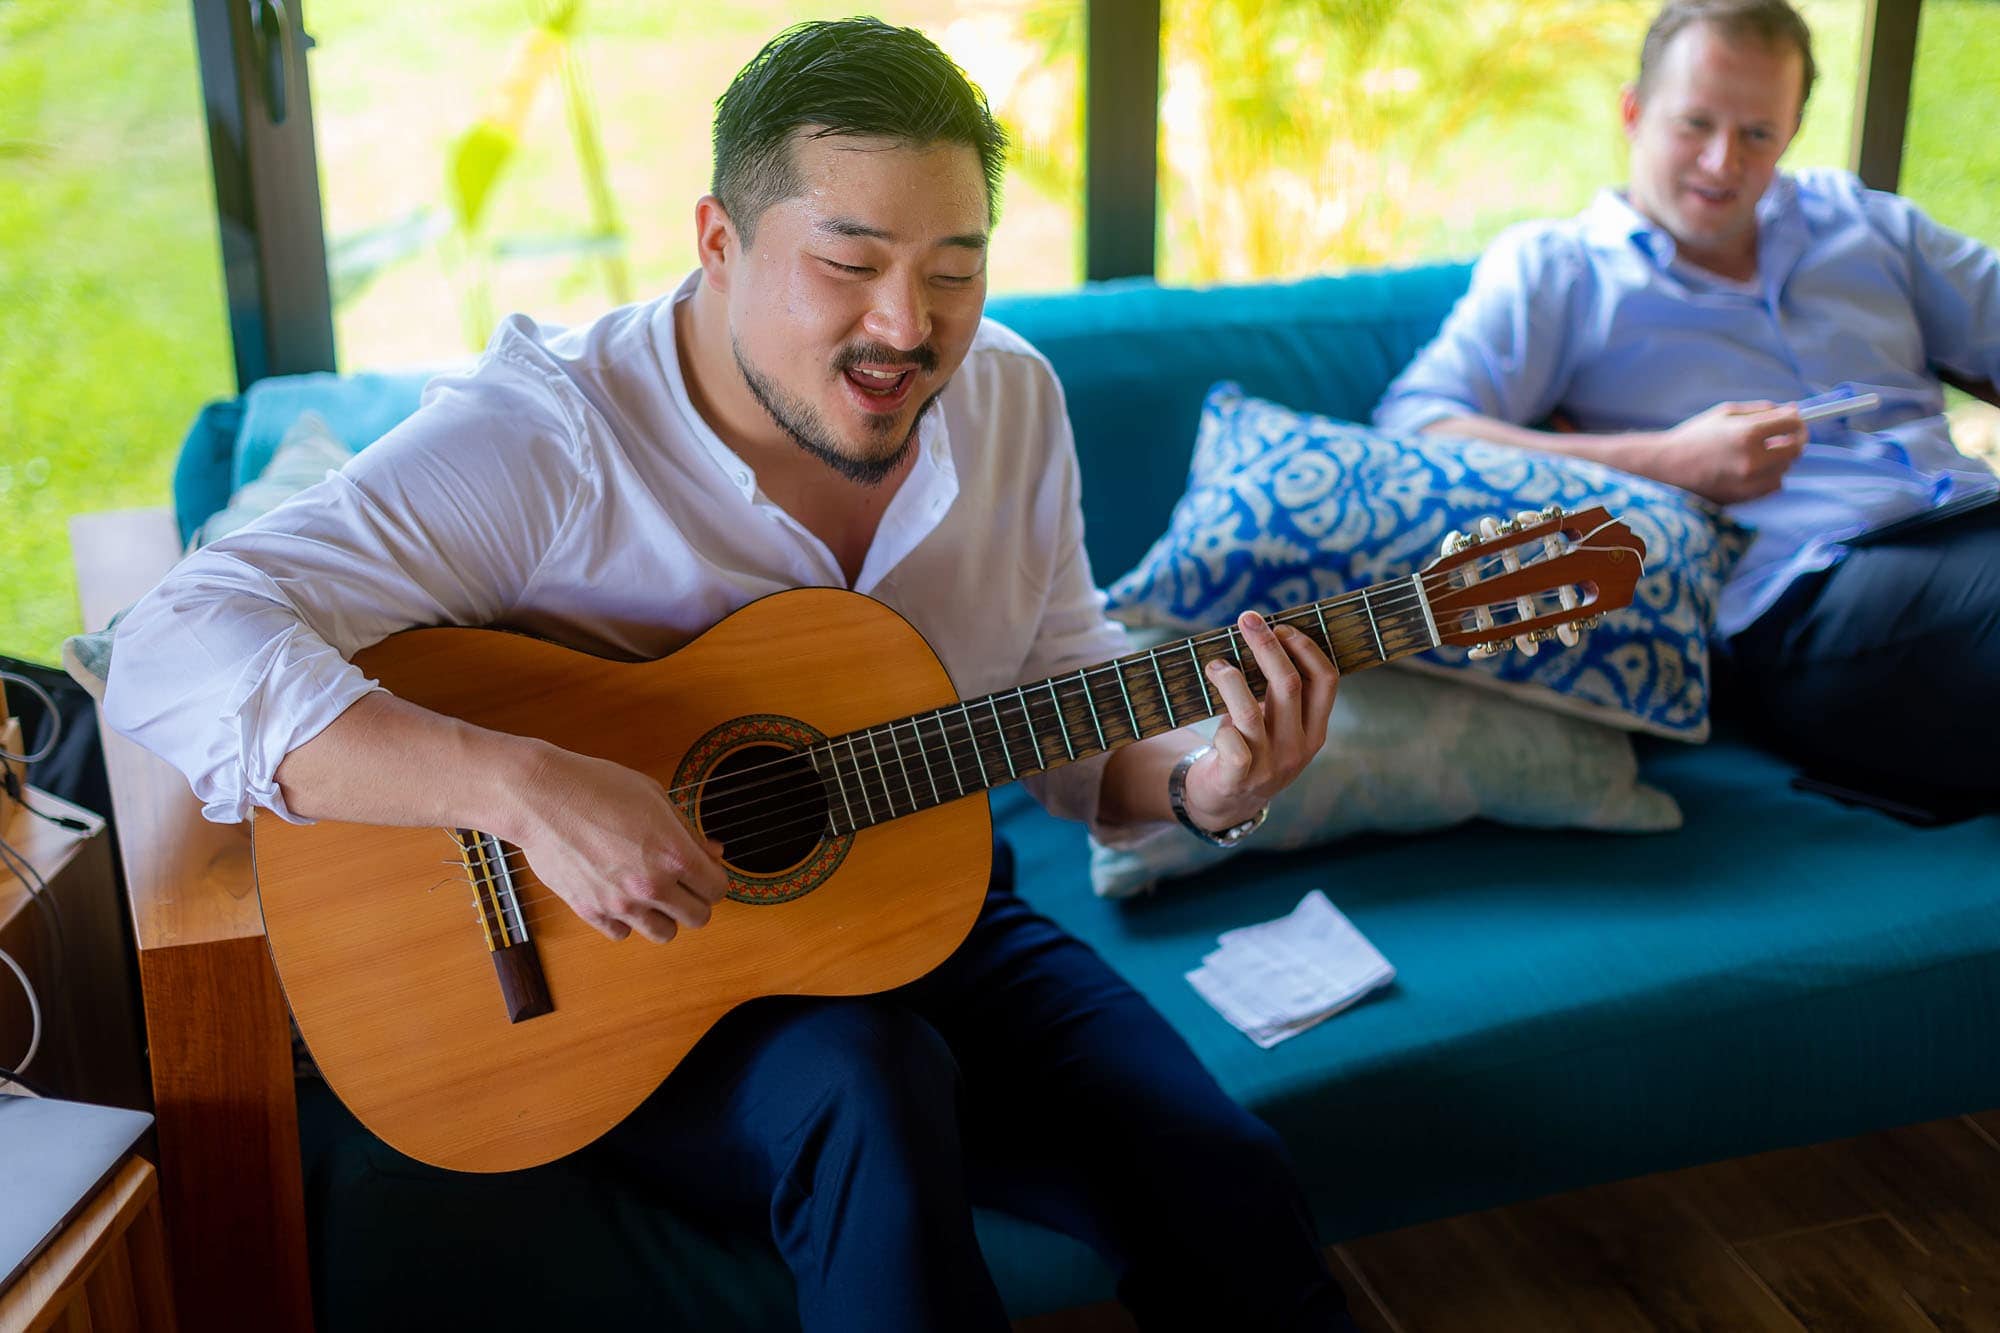 The groom singing with his guitar